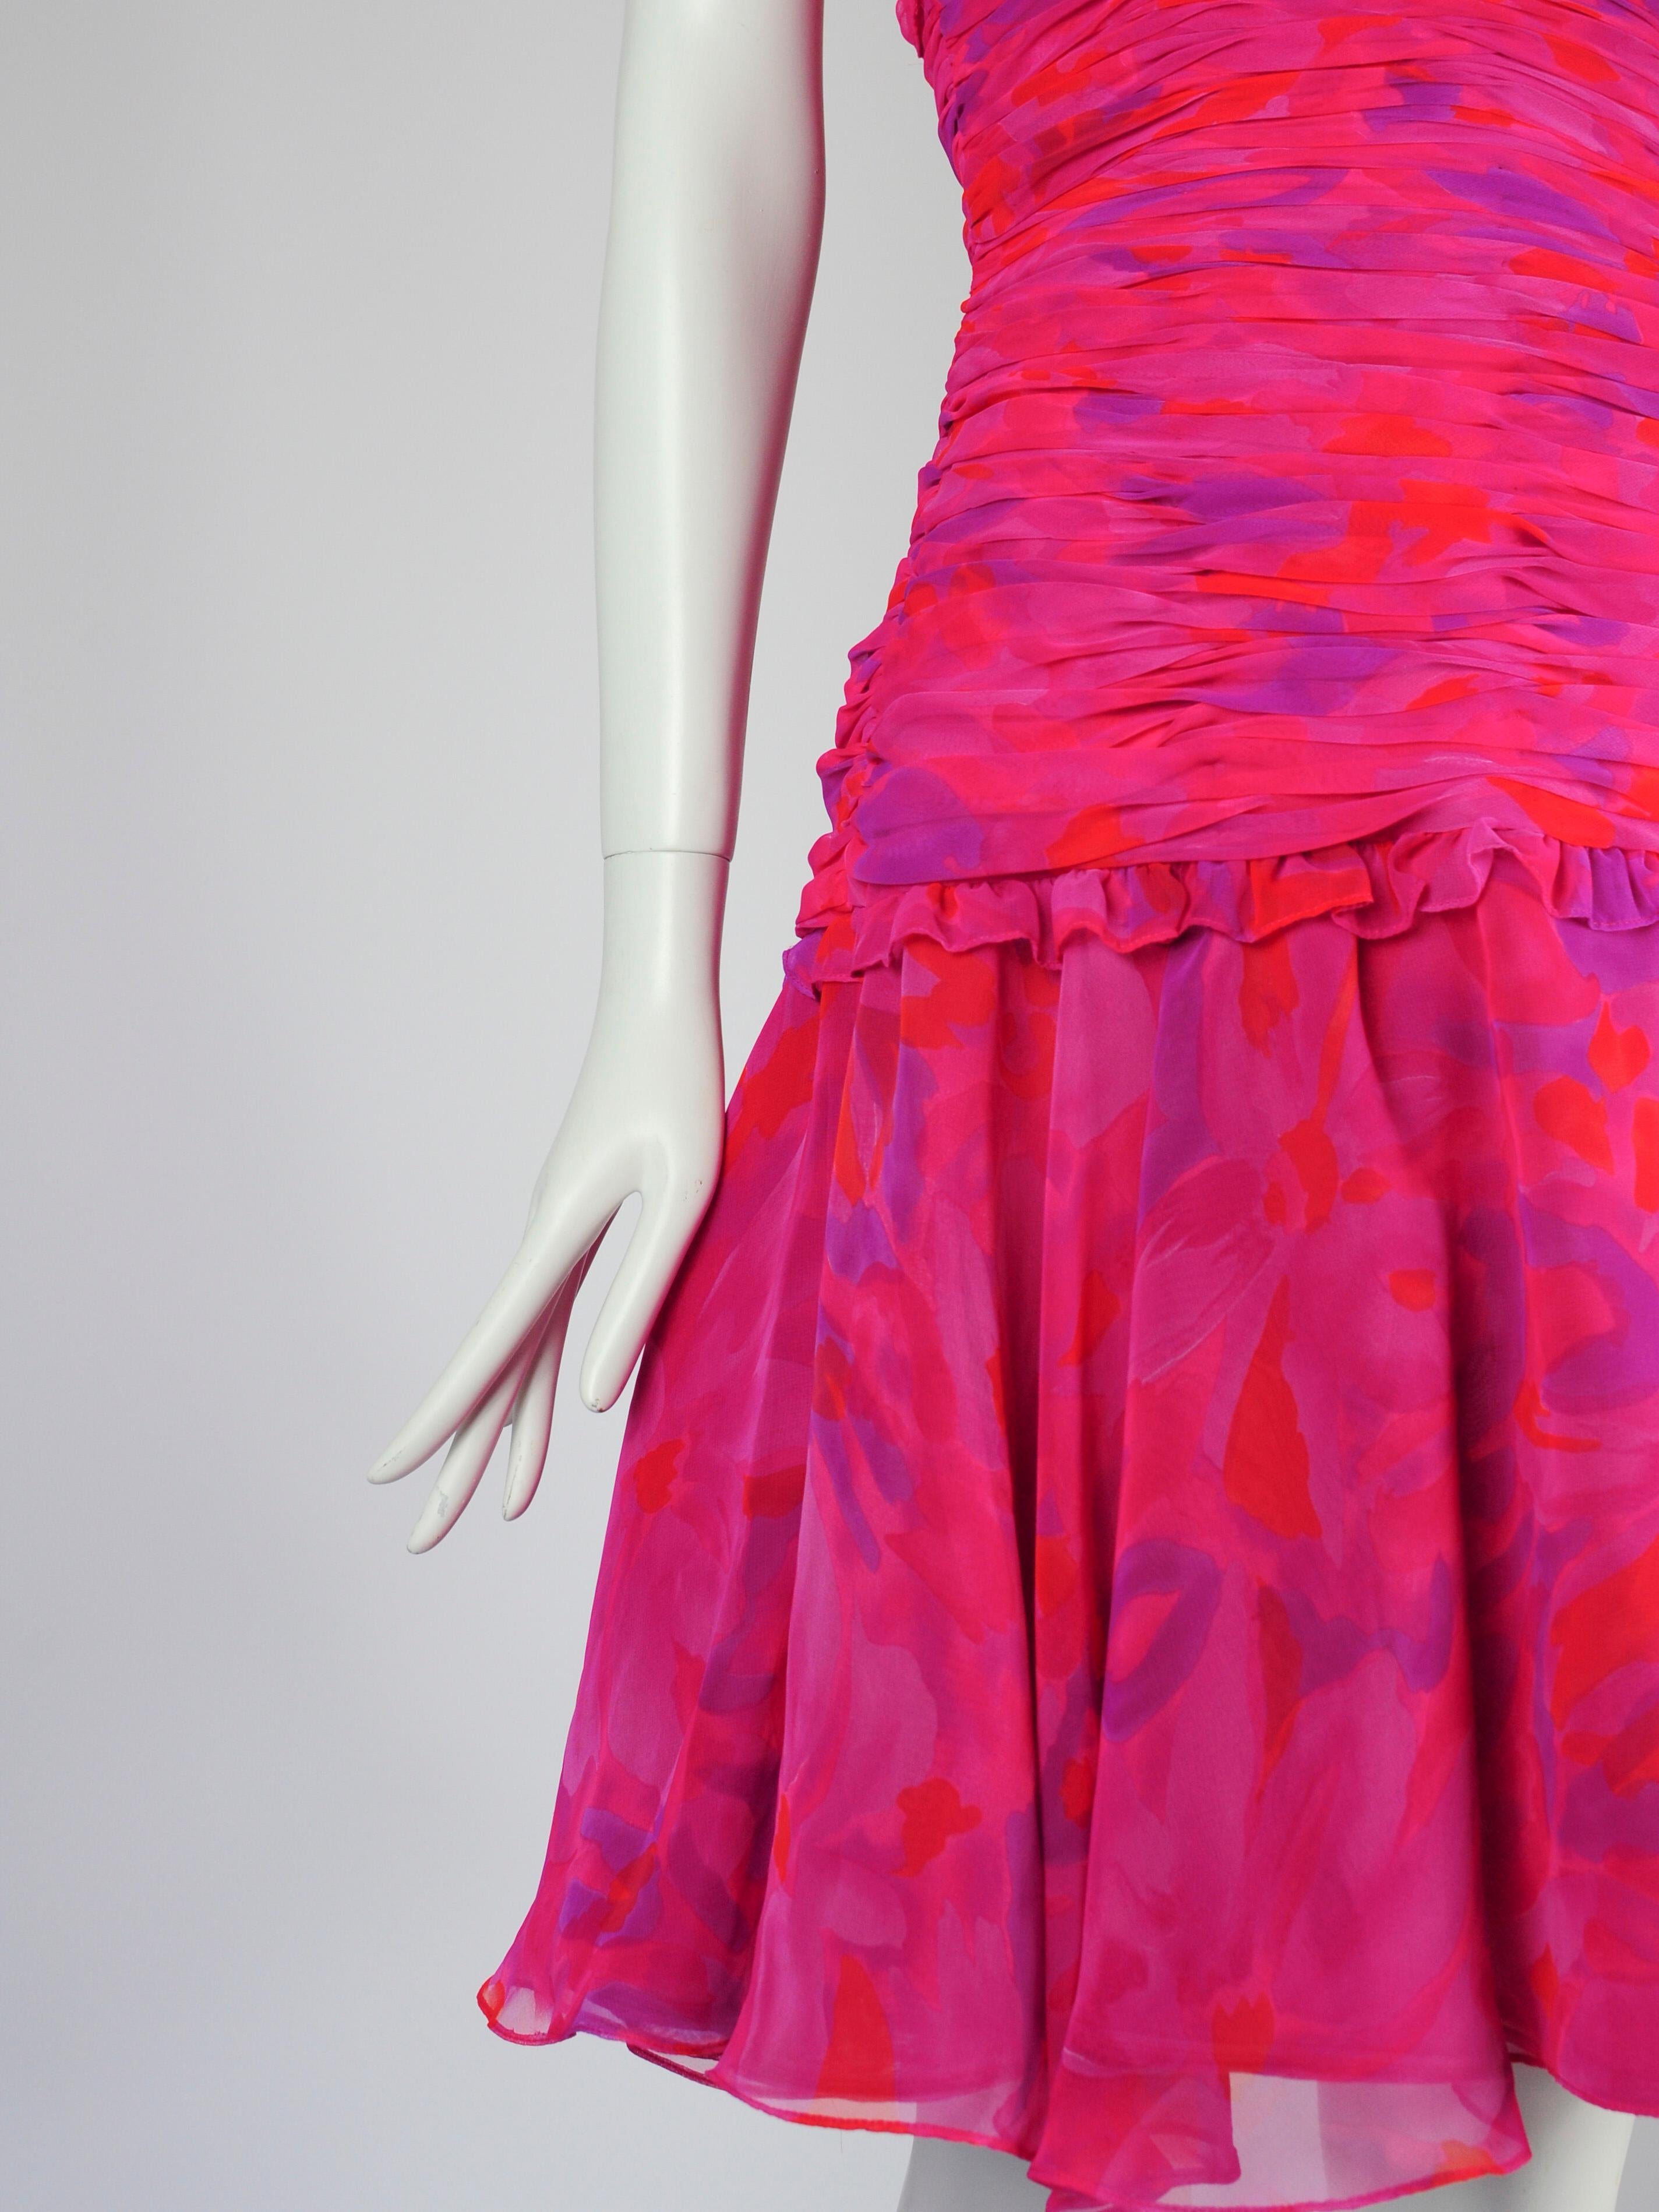 Victor Costa for Saks Fifth Avenue Strapless Cocktail Dress Abstract Print 1980s For Sale 4